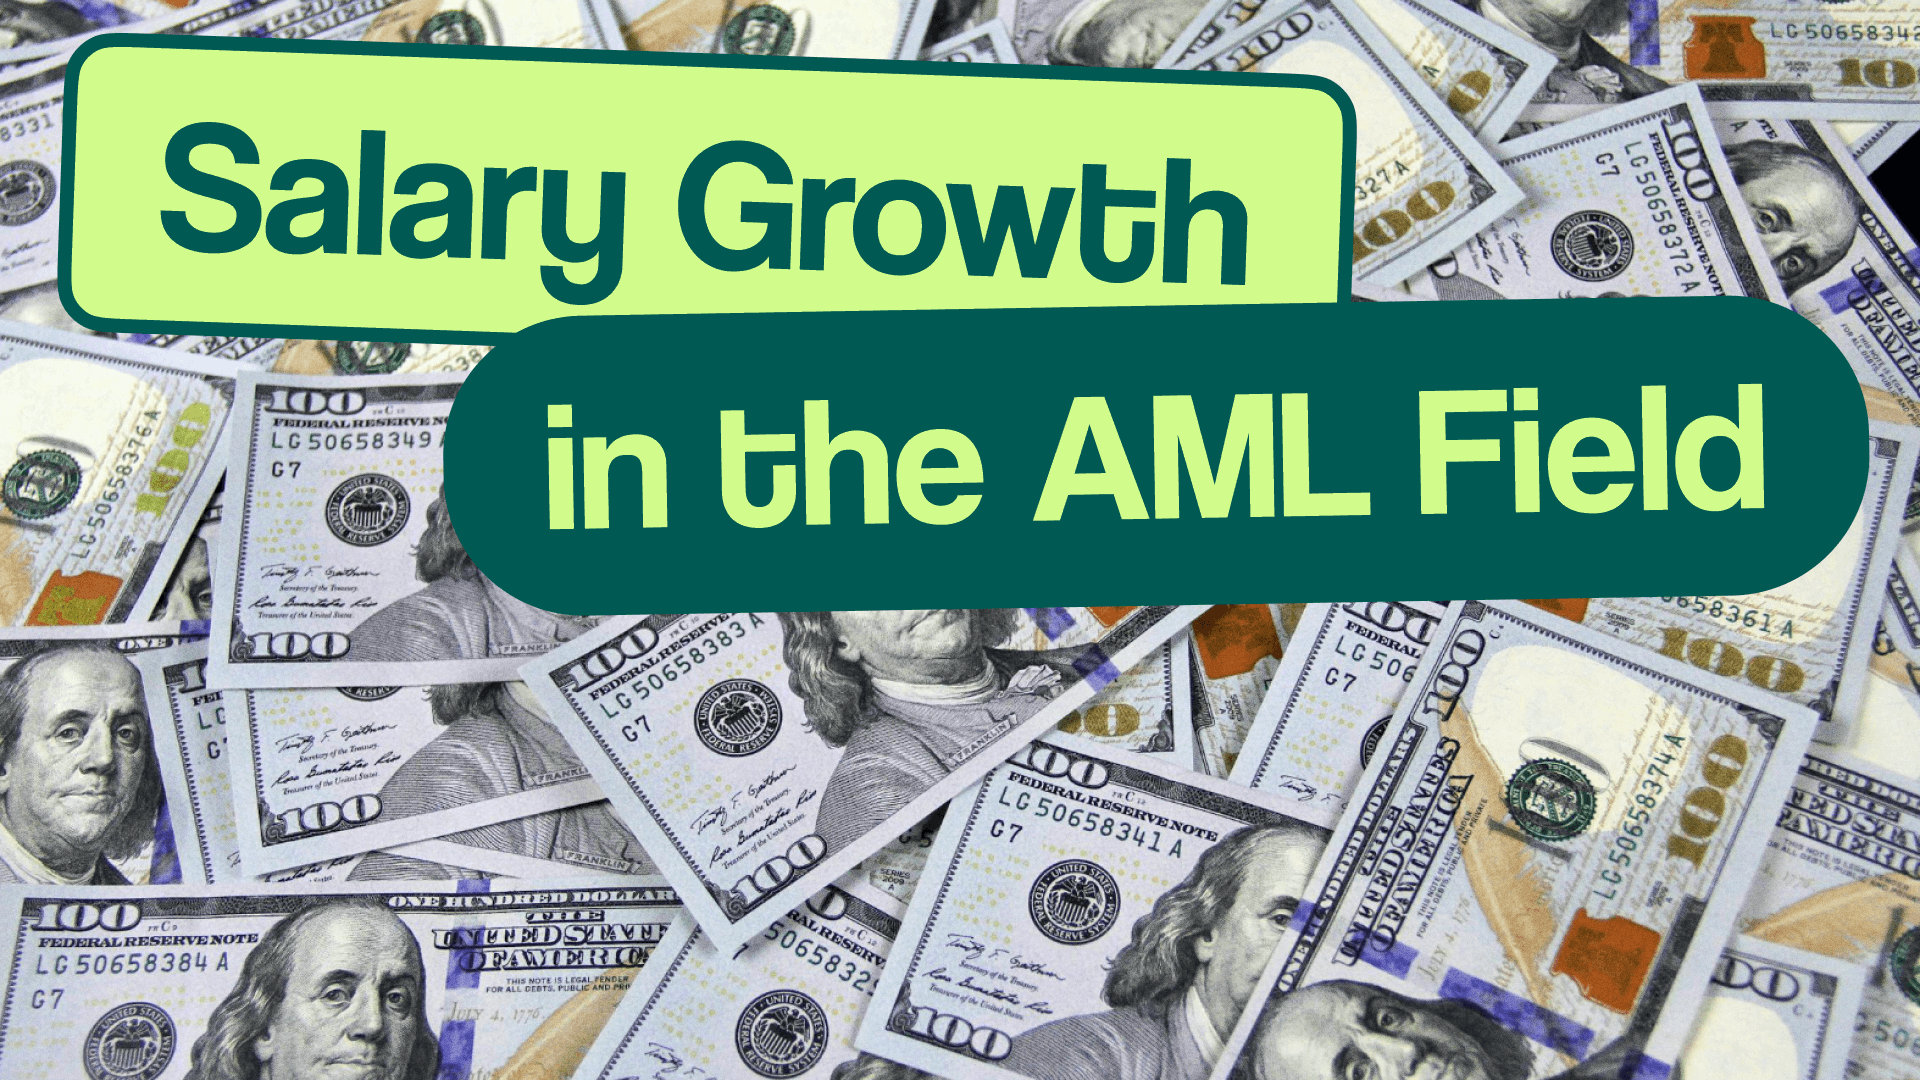 How Have Salaries Increased for AML Specialists?